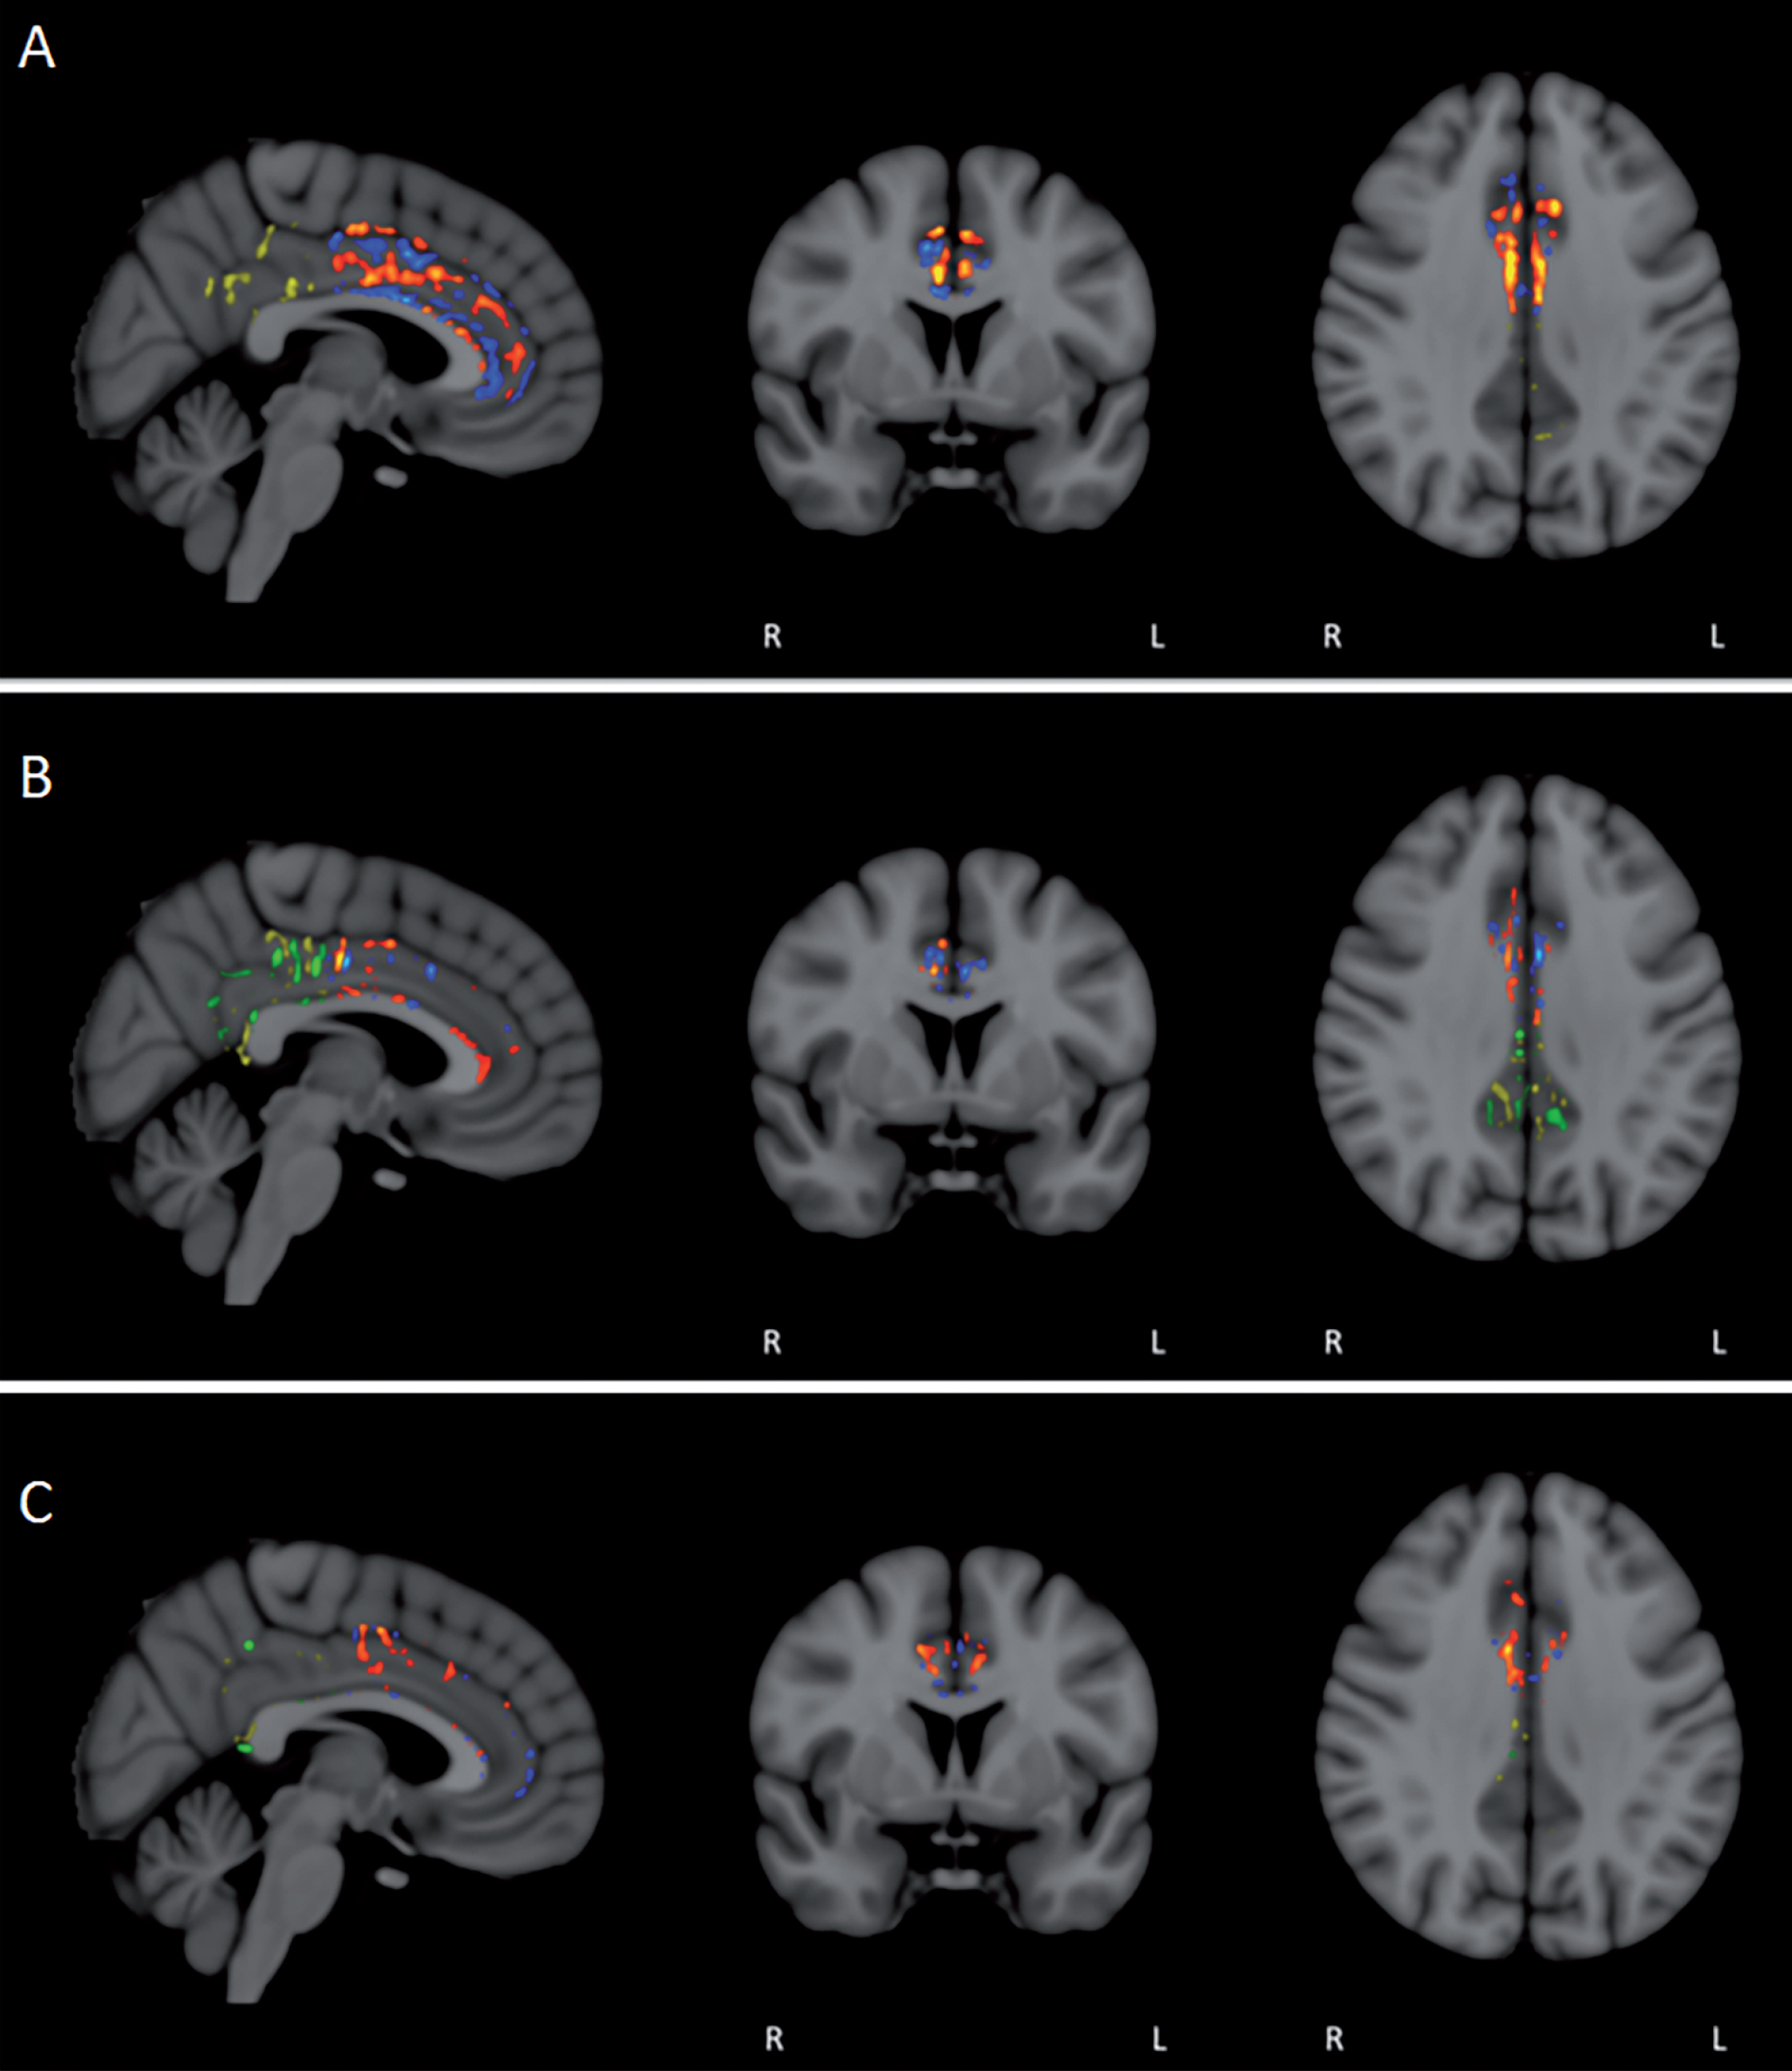 FA/DTI analysis in individual subjects for pre- versus post-treatment differences in the anterior and posterior cingulate cortex/cingulum. Voxel-by-voxel analysis for significant differences (p < 0.05) revealed not only the expected areas of decreased FA in individual subjects (blue/green in anterior/posterior), but also prominent area of enhanced FA (red/yellow in anterior/posterior). For most subjects, enhanced FA was observed in both the anterior and posterior cingulate cortex/cingulum (A and B), although several subjects exhibited more pronounced FA enhancement in either the anterior (C) or posterior regions.